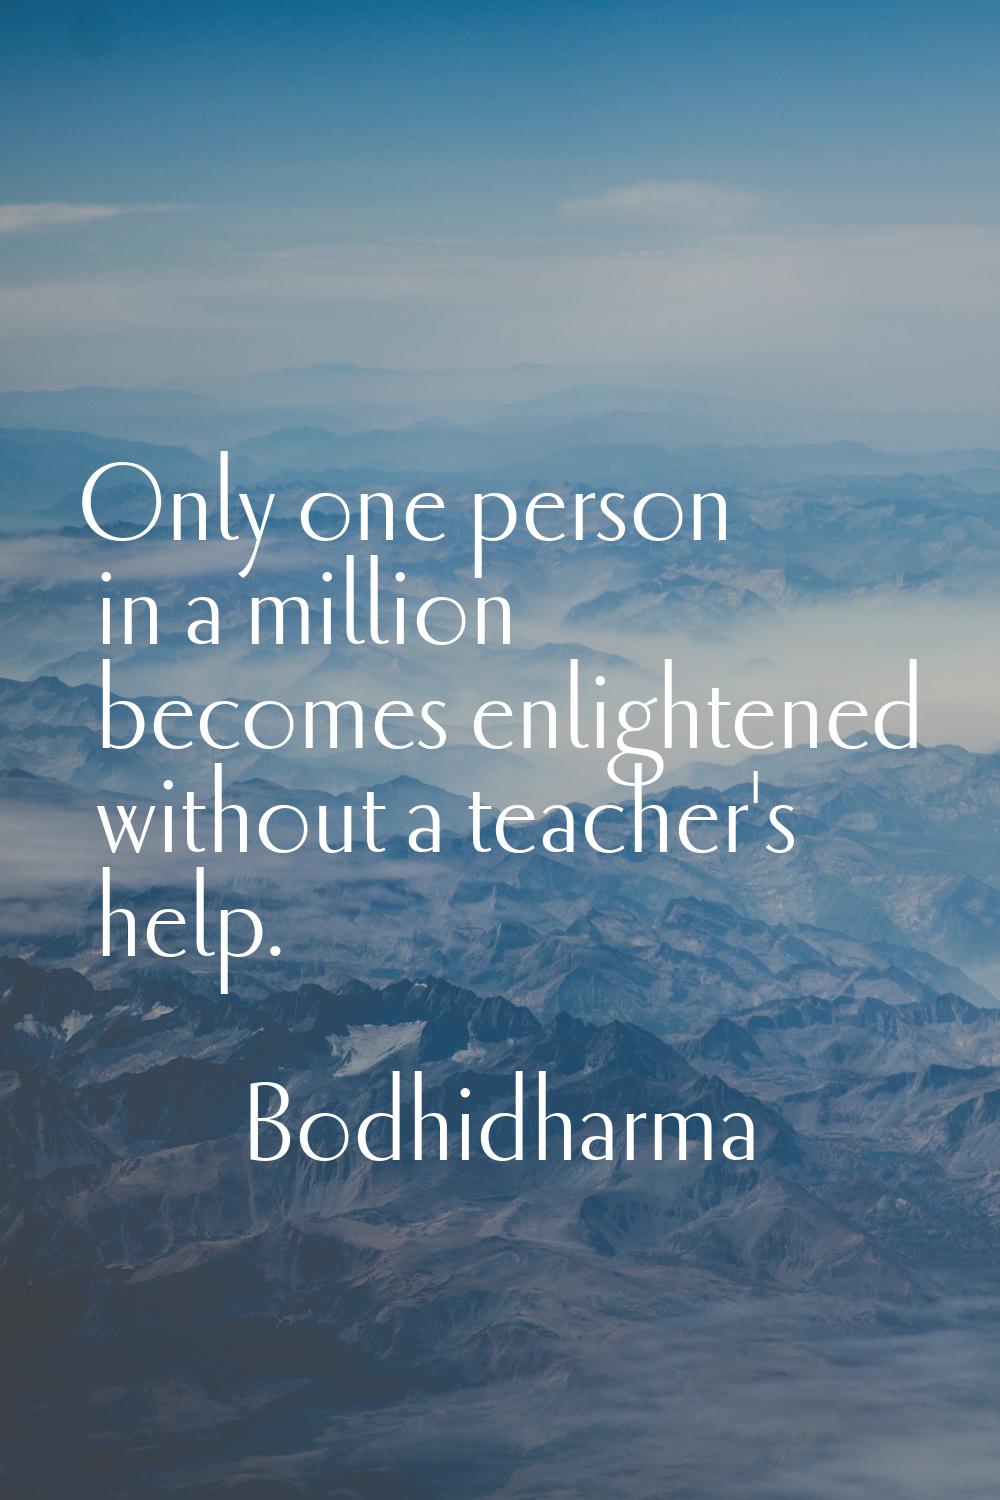 Only one person in a million becomes enlightened without a teacher's help.